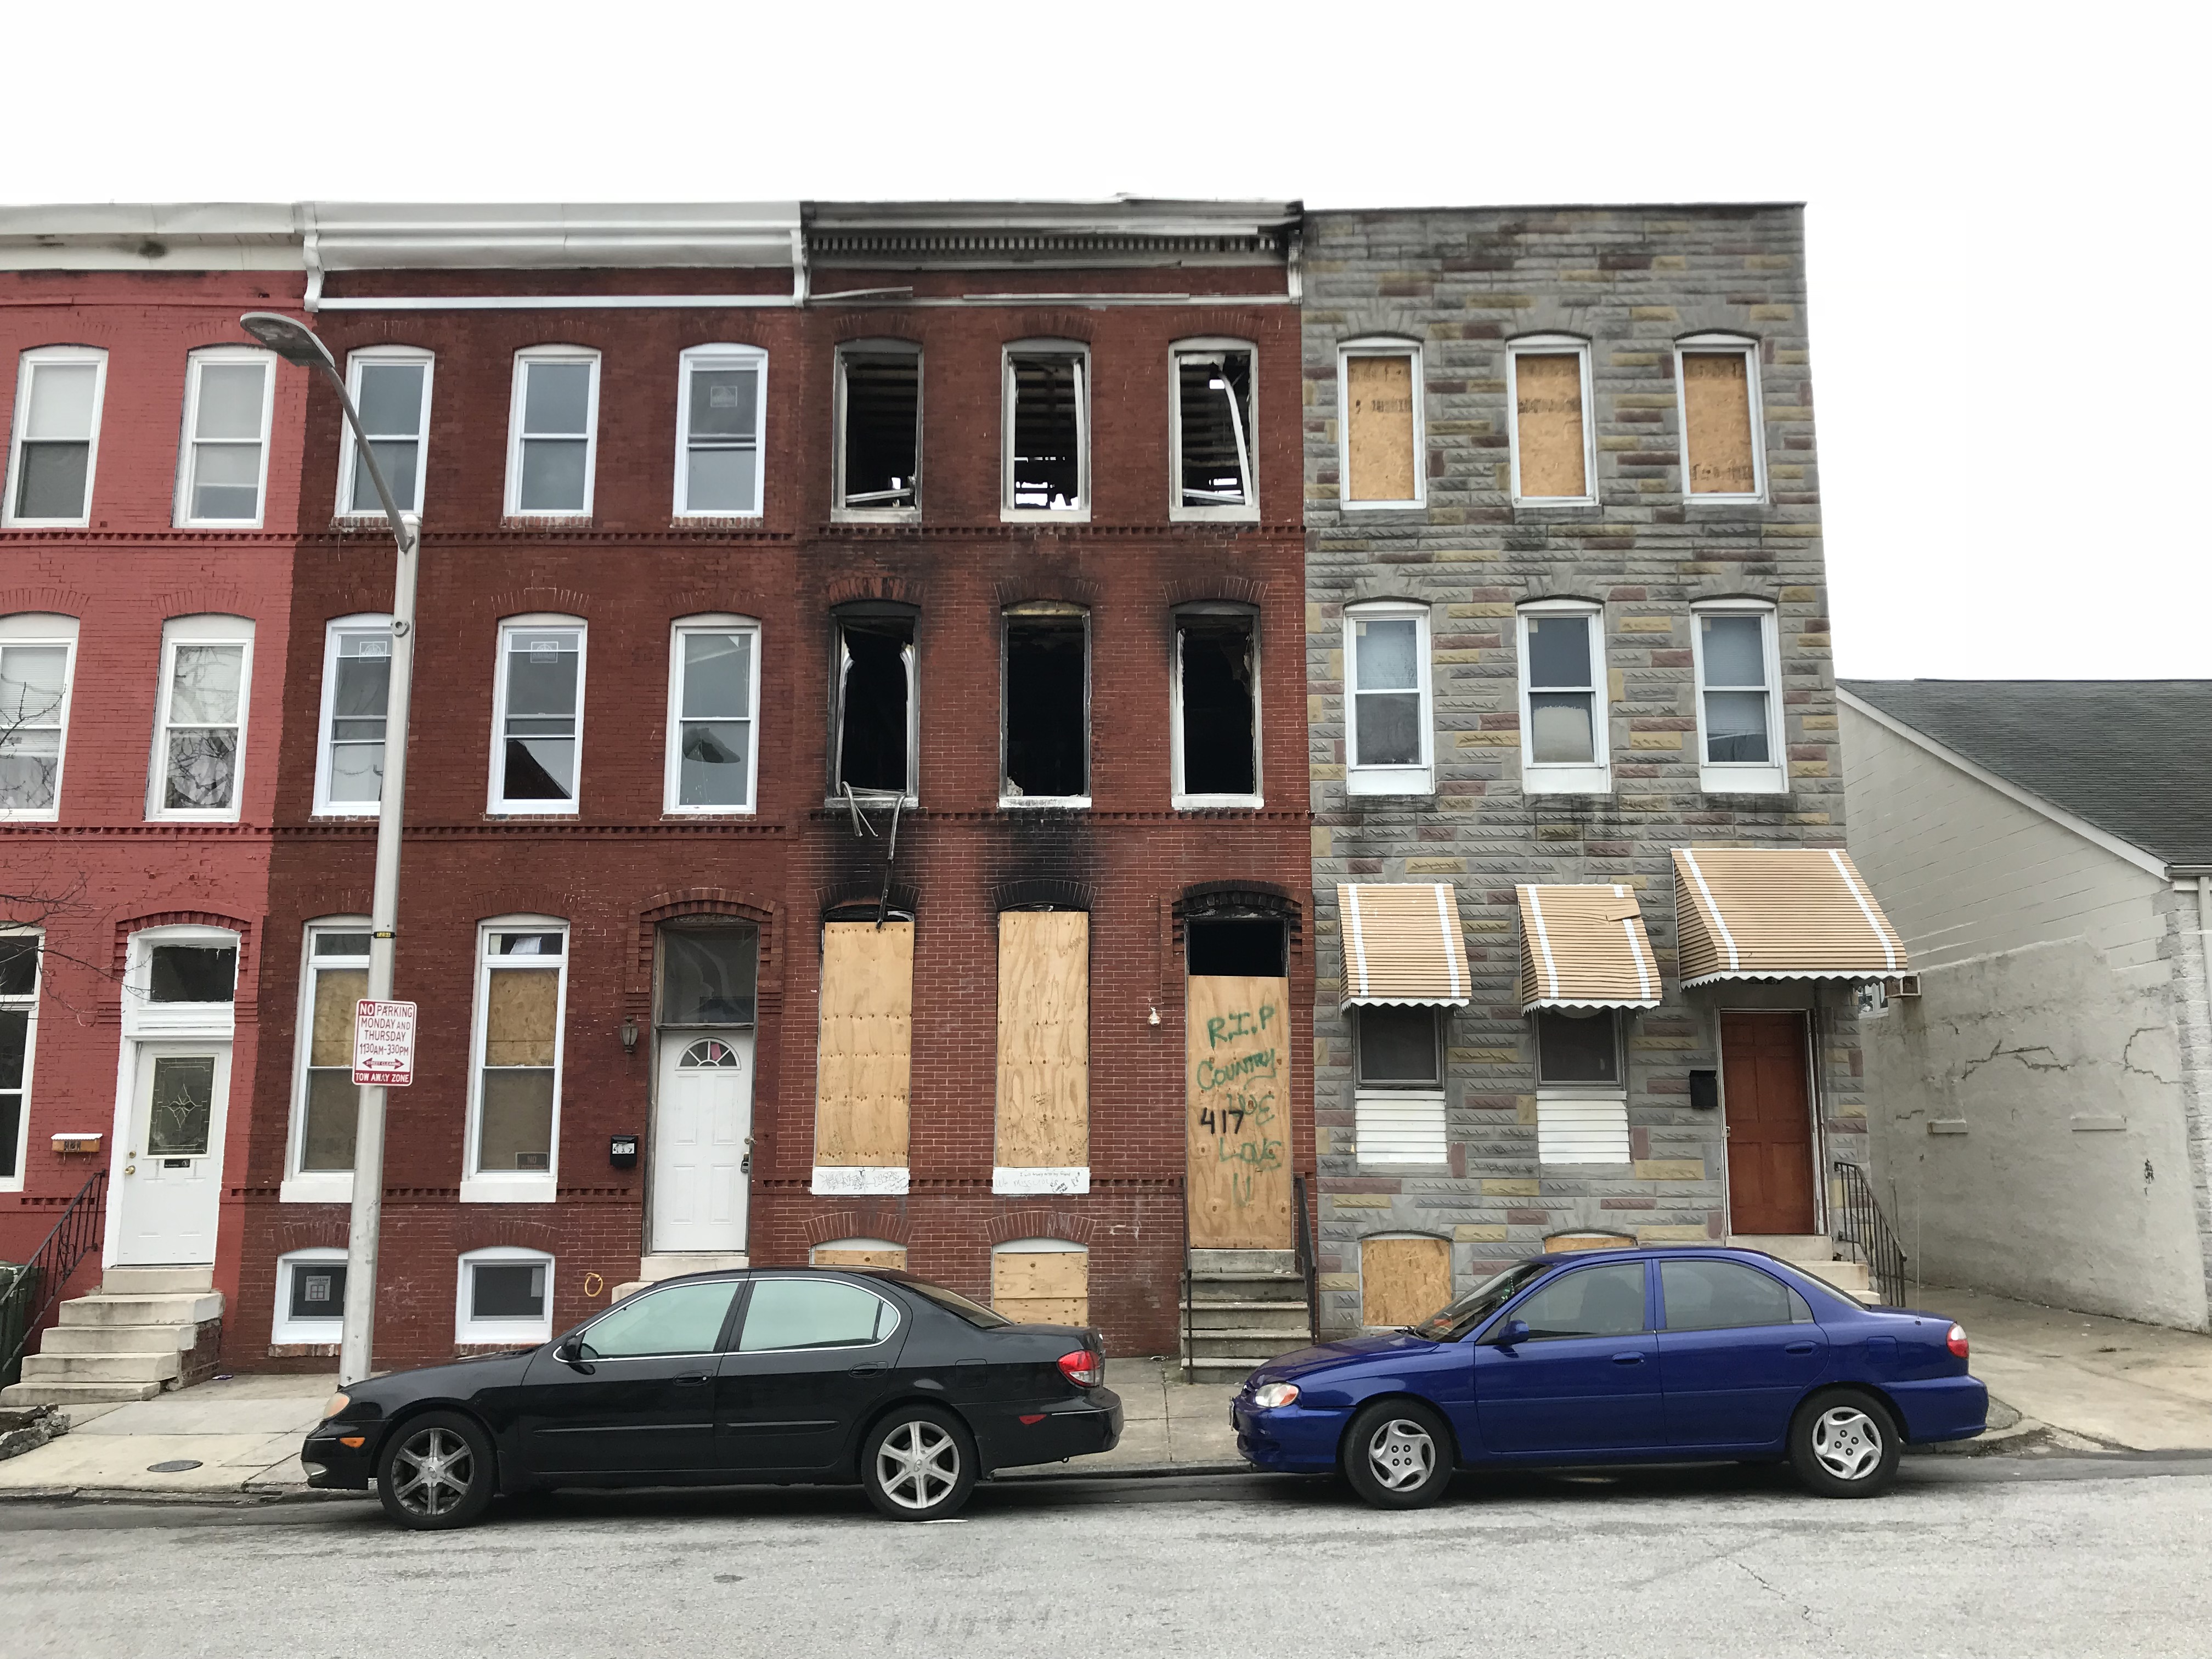 Fire-damaged vacant rowhouse, 417 E. 21st Street, Baltimore, MD 21218, Architecture, Baltimore, Barclay, Barclay Street, HQ Photo